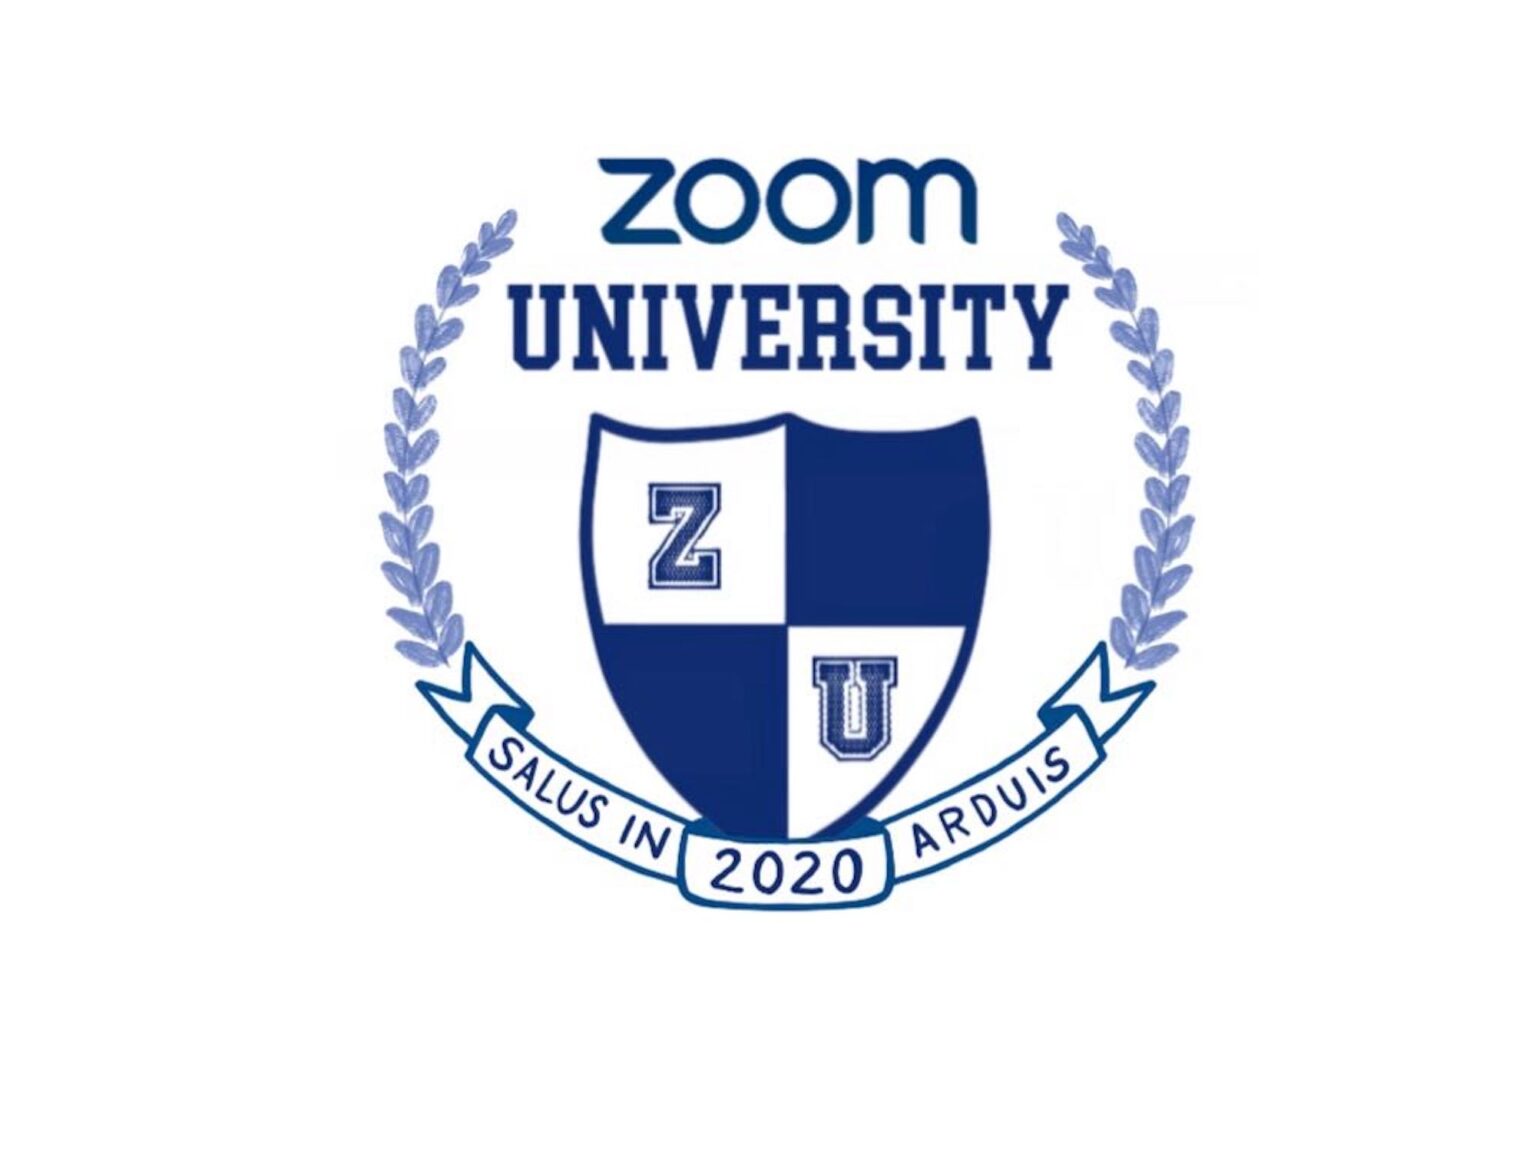 Students of Zoom University, gather around for some of the funniest college memes about being an online student. Welcome to Zoomiversity!